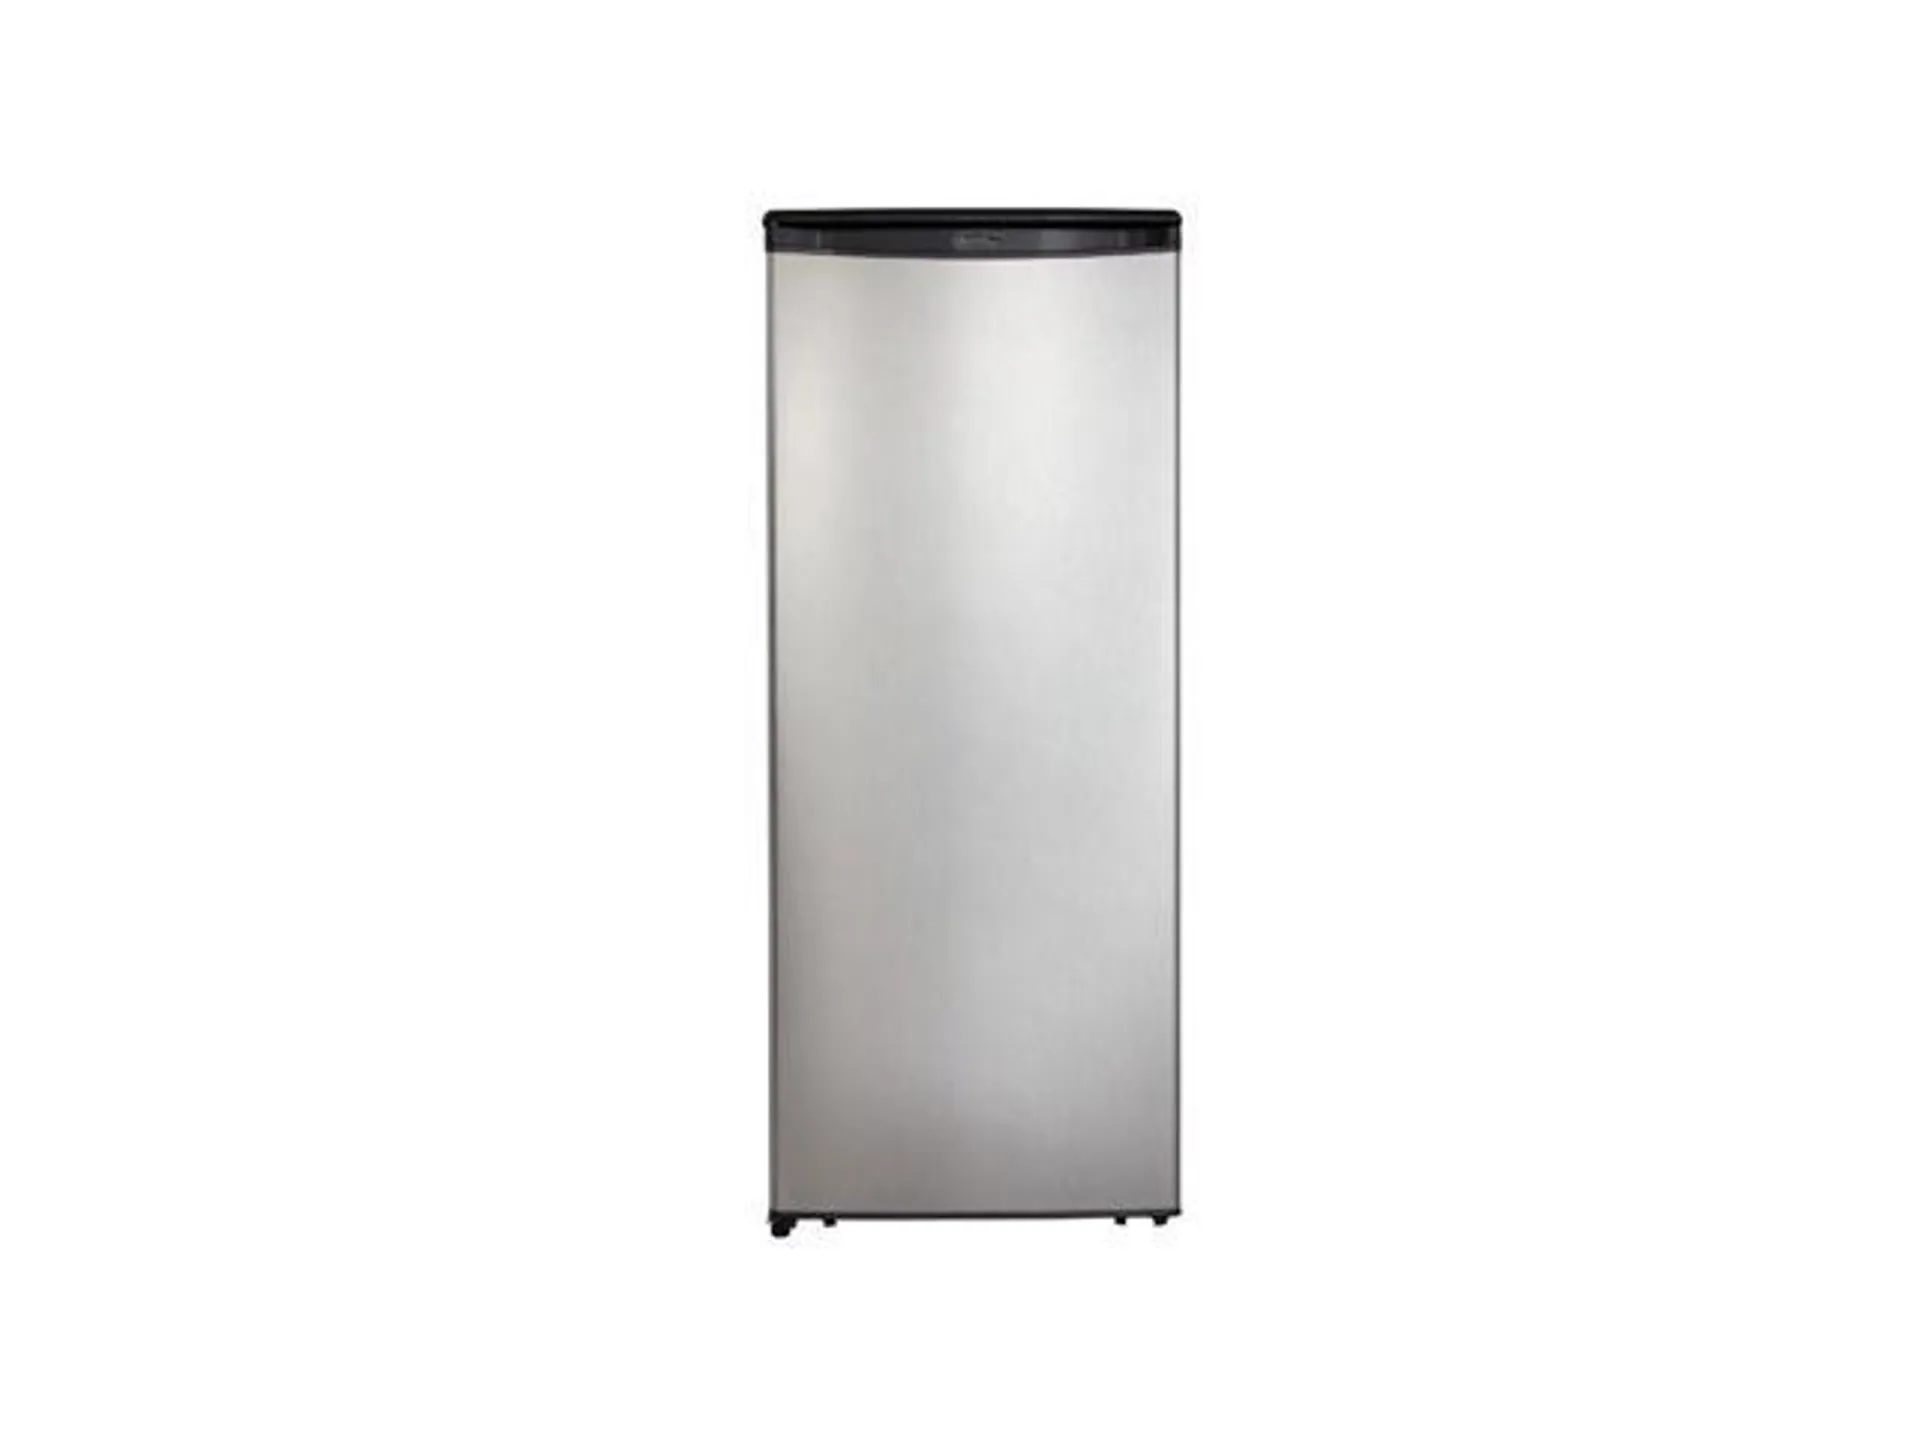 Danby Designer 11 C Ft Automatic Defrost Apartment Refrigerator, Spotless Steel